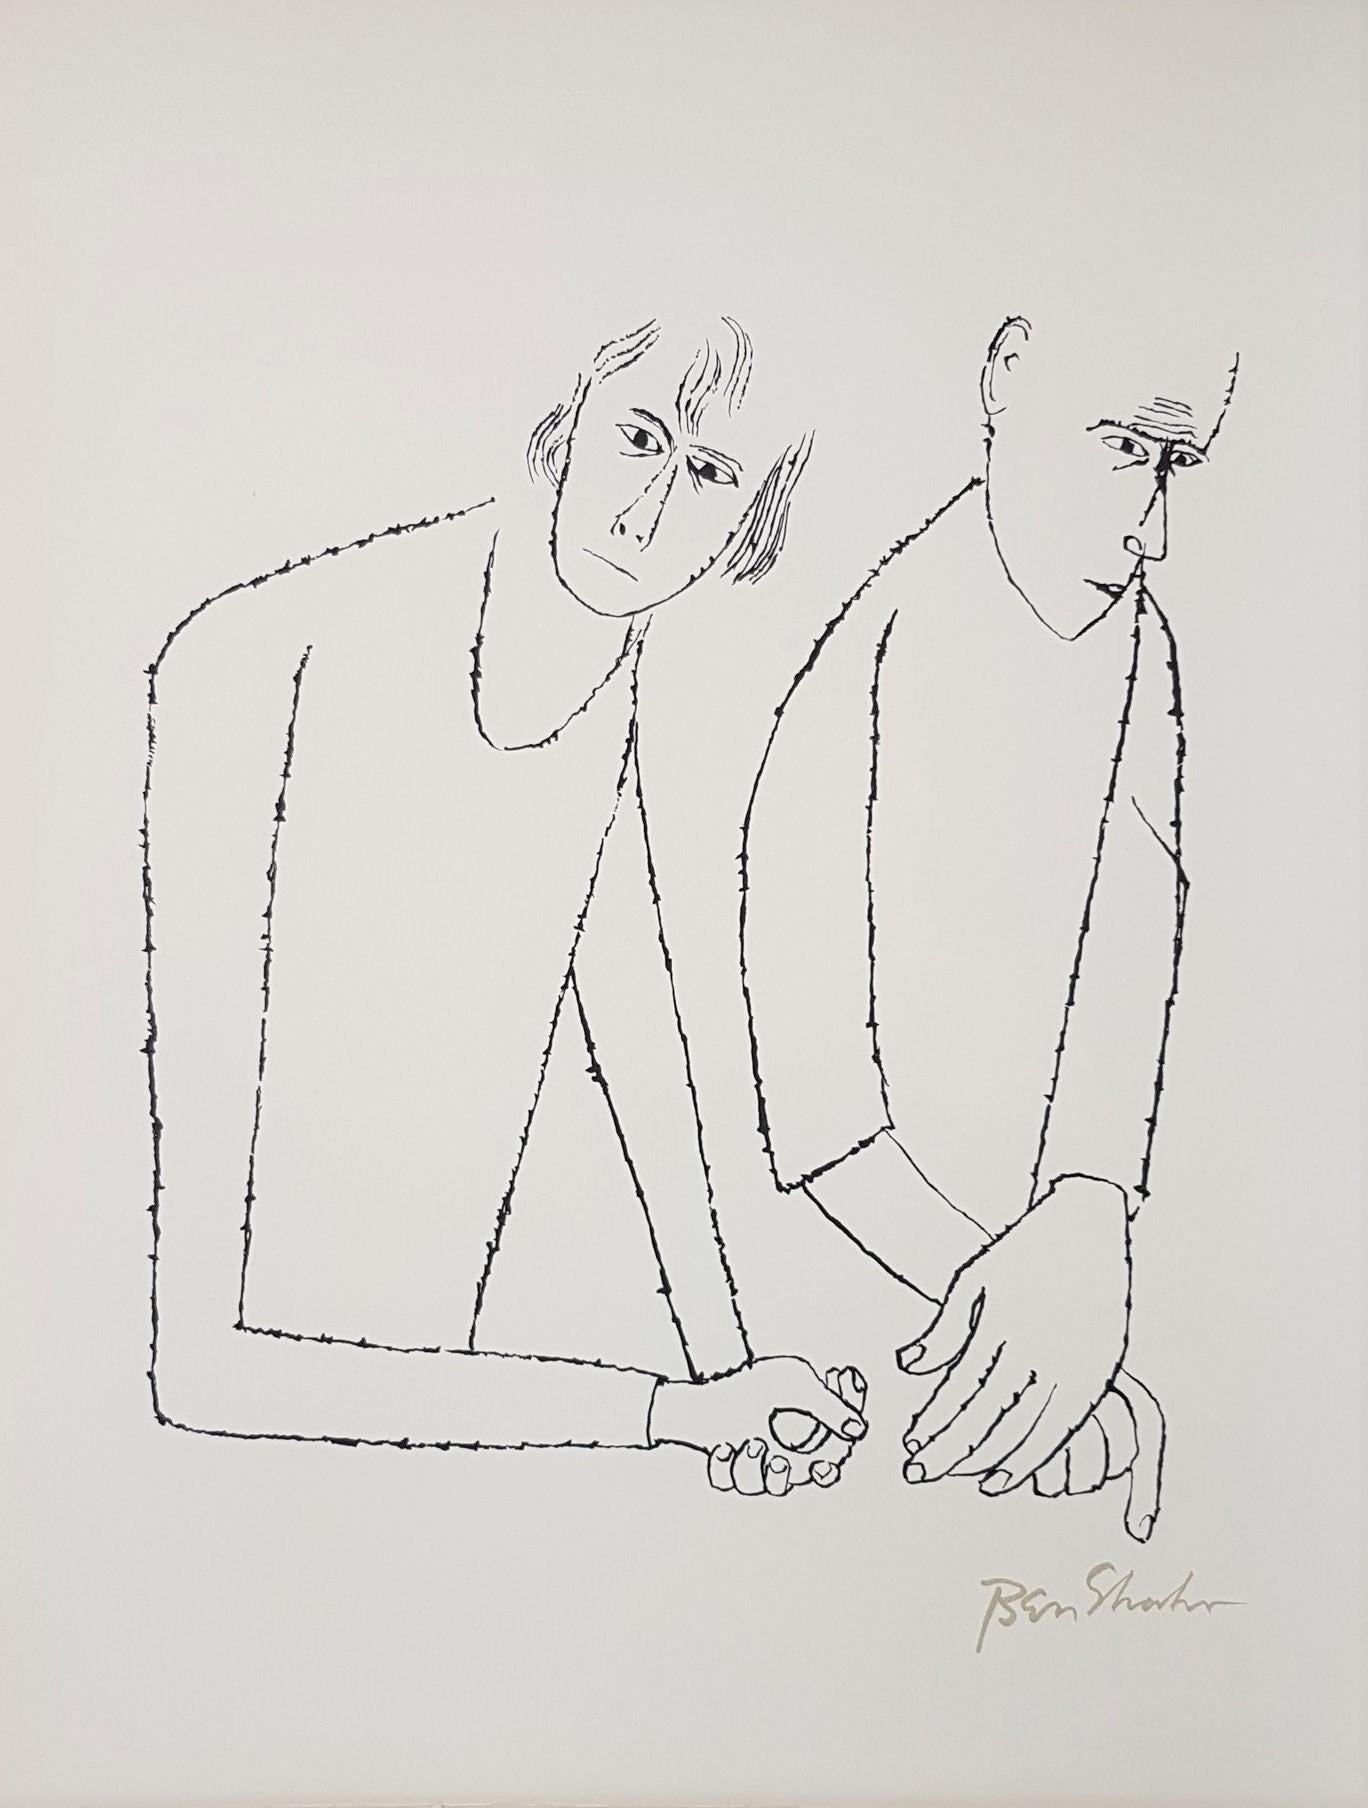 To parents one had to hurt - For the Sake of A Single Verse Rainer Maria Rilke - Print by Ben Shahn